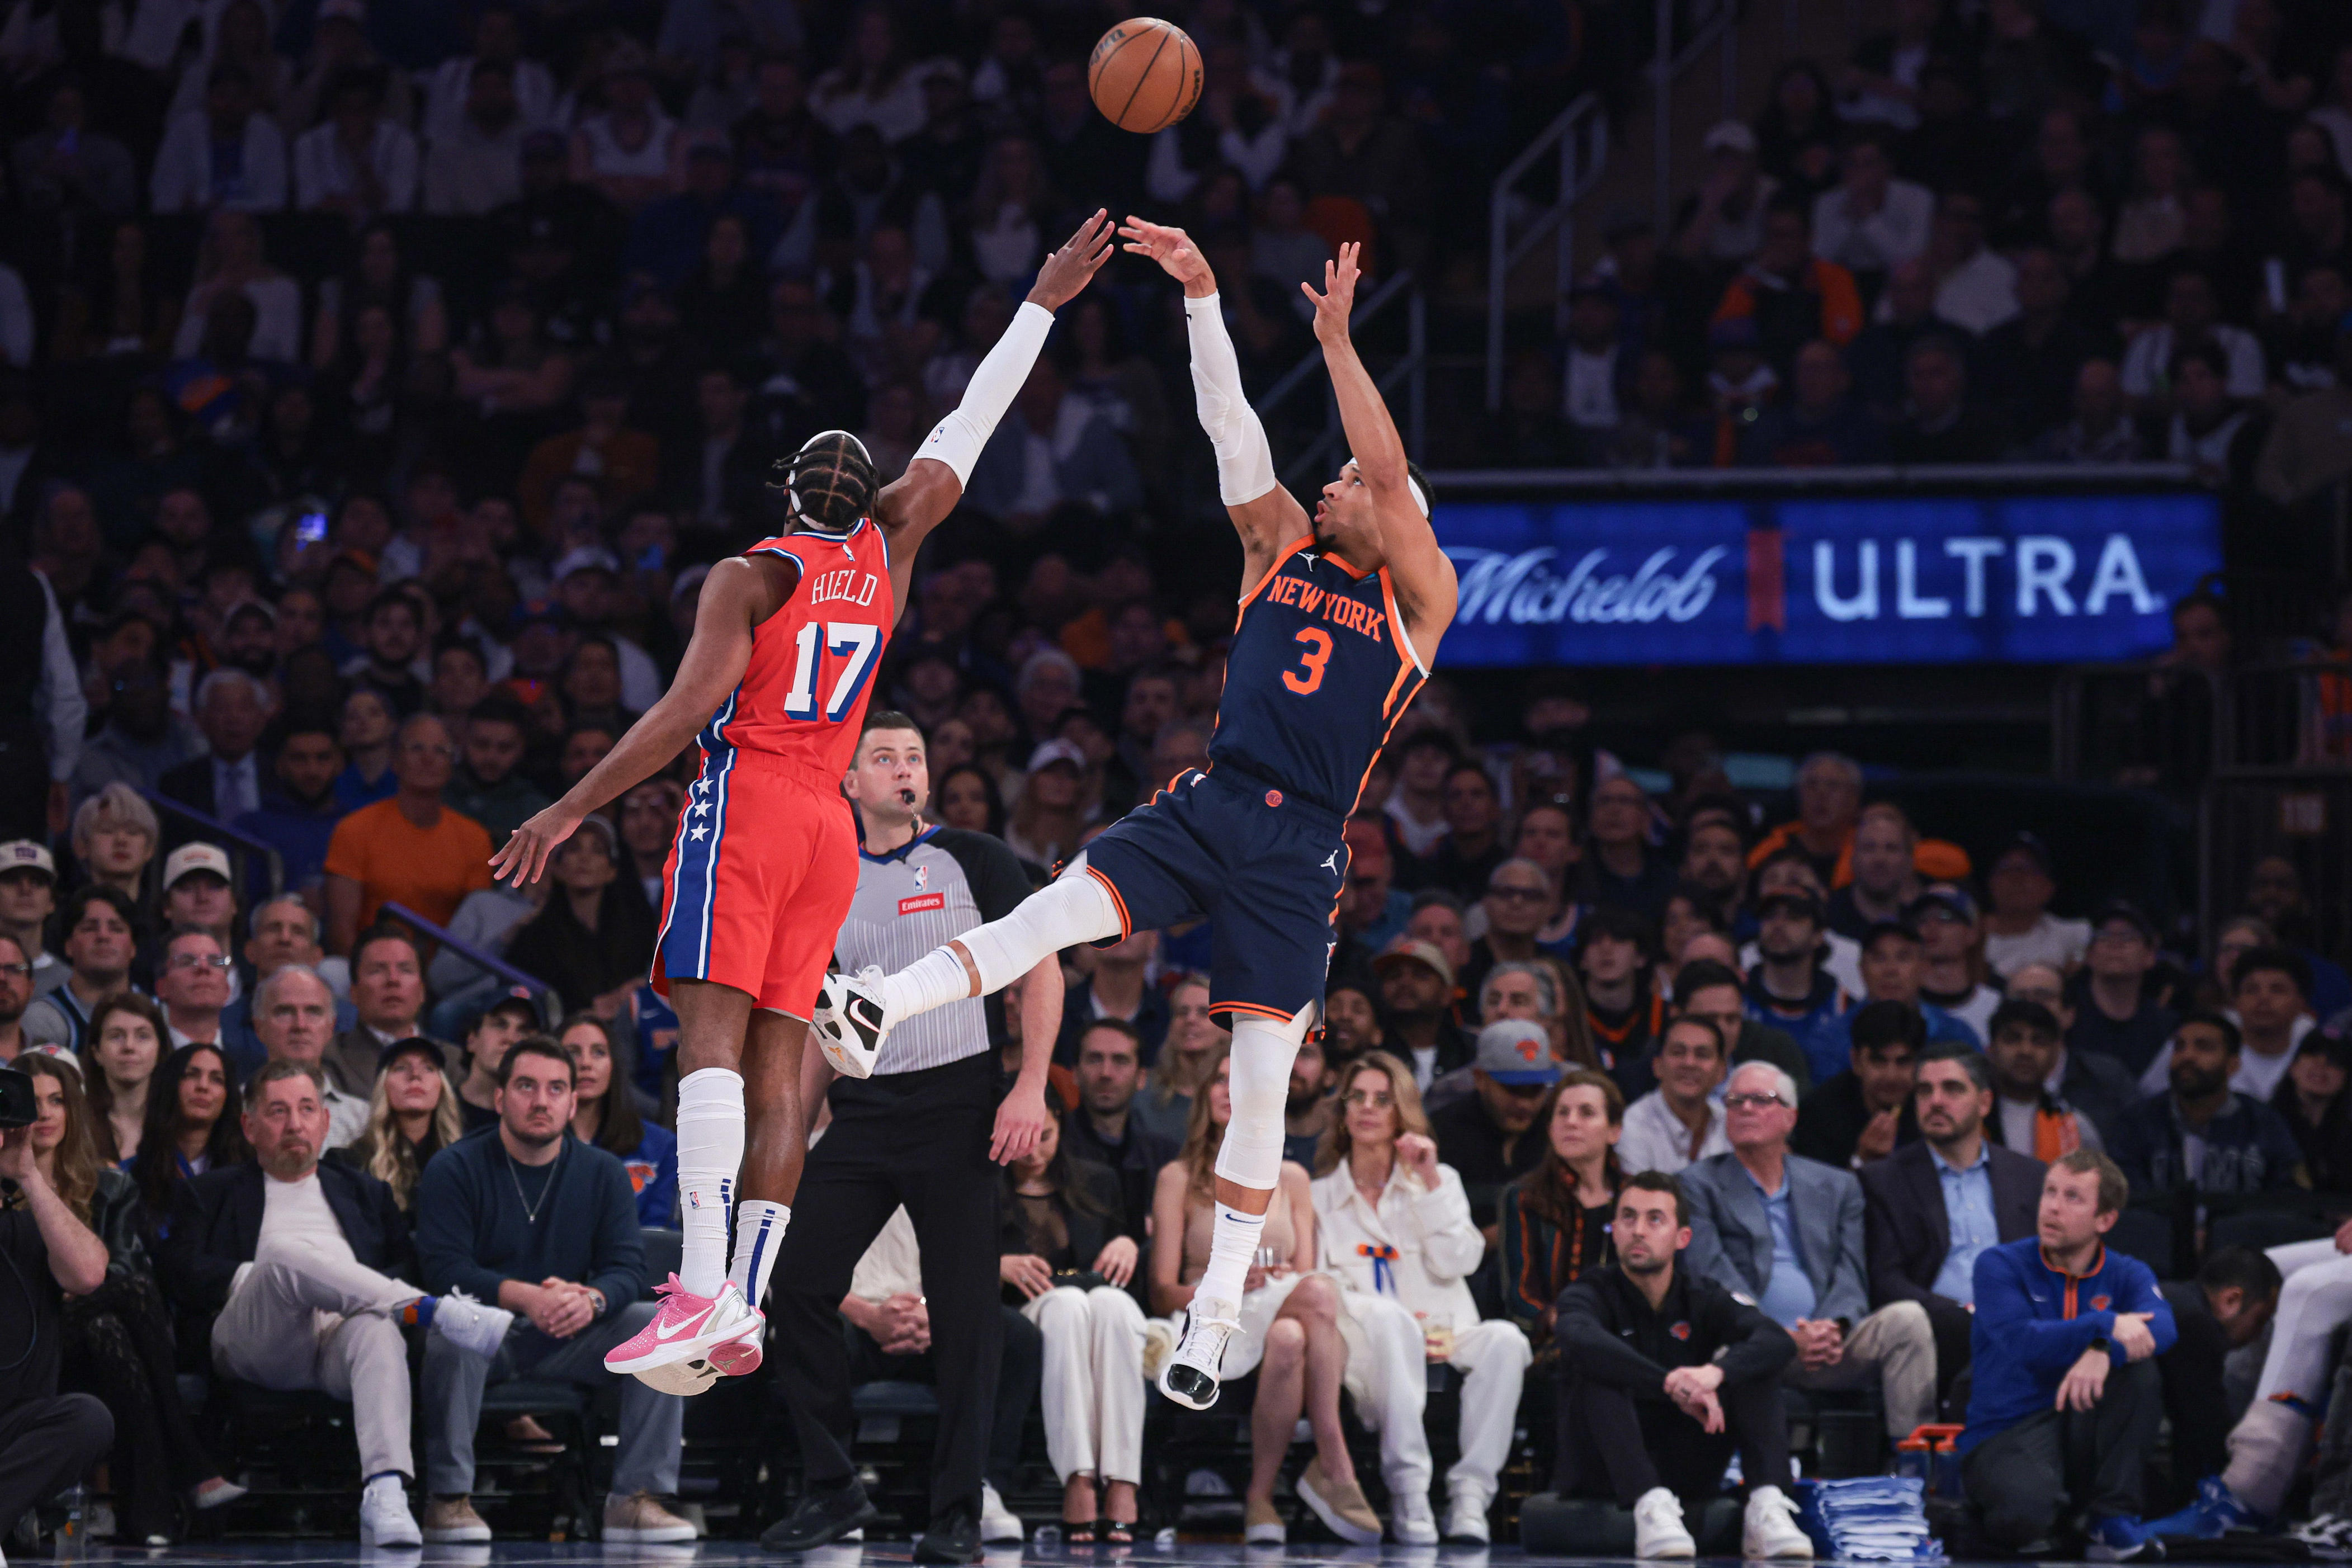 knicks go up 2-0 in first round of nba playoffs after sixers blow lead in final minute